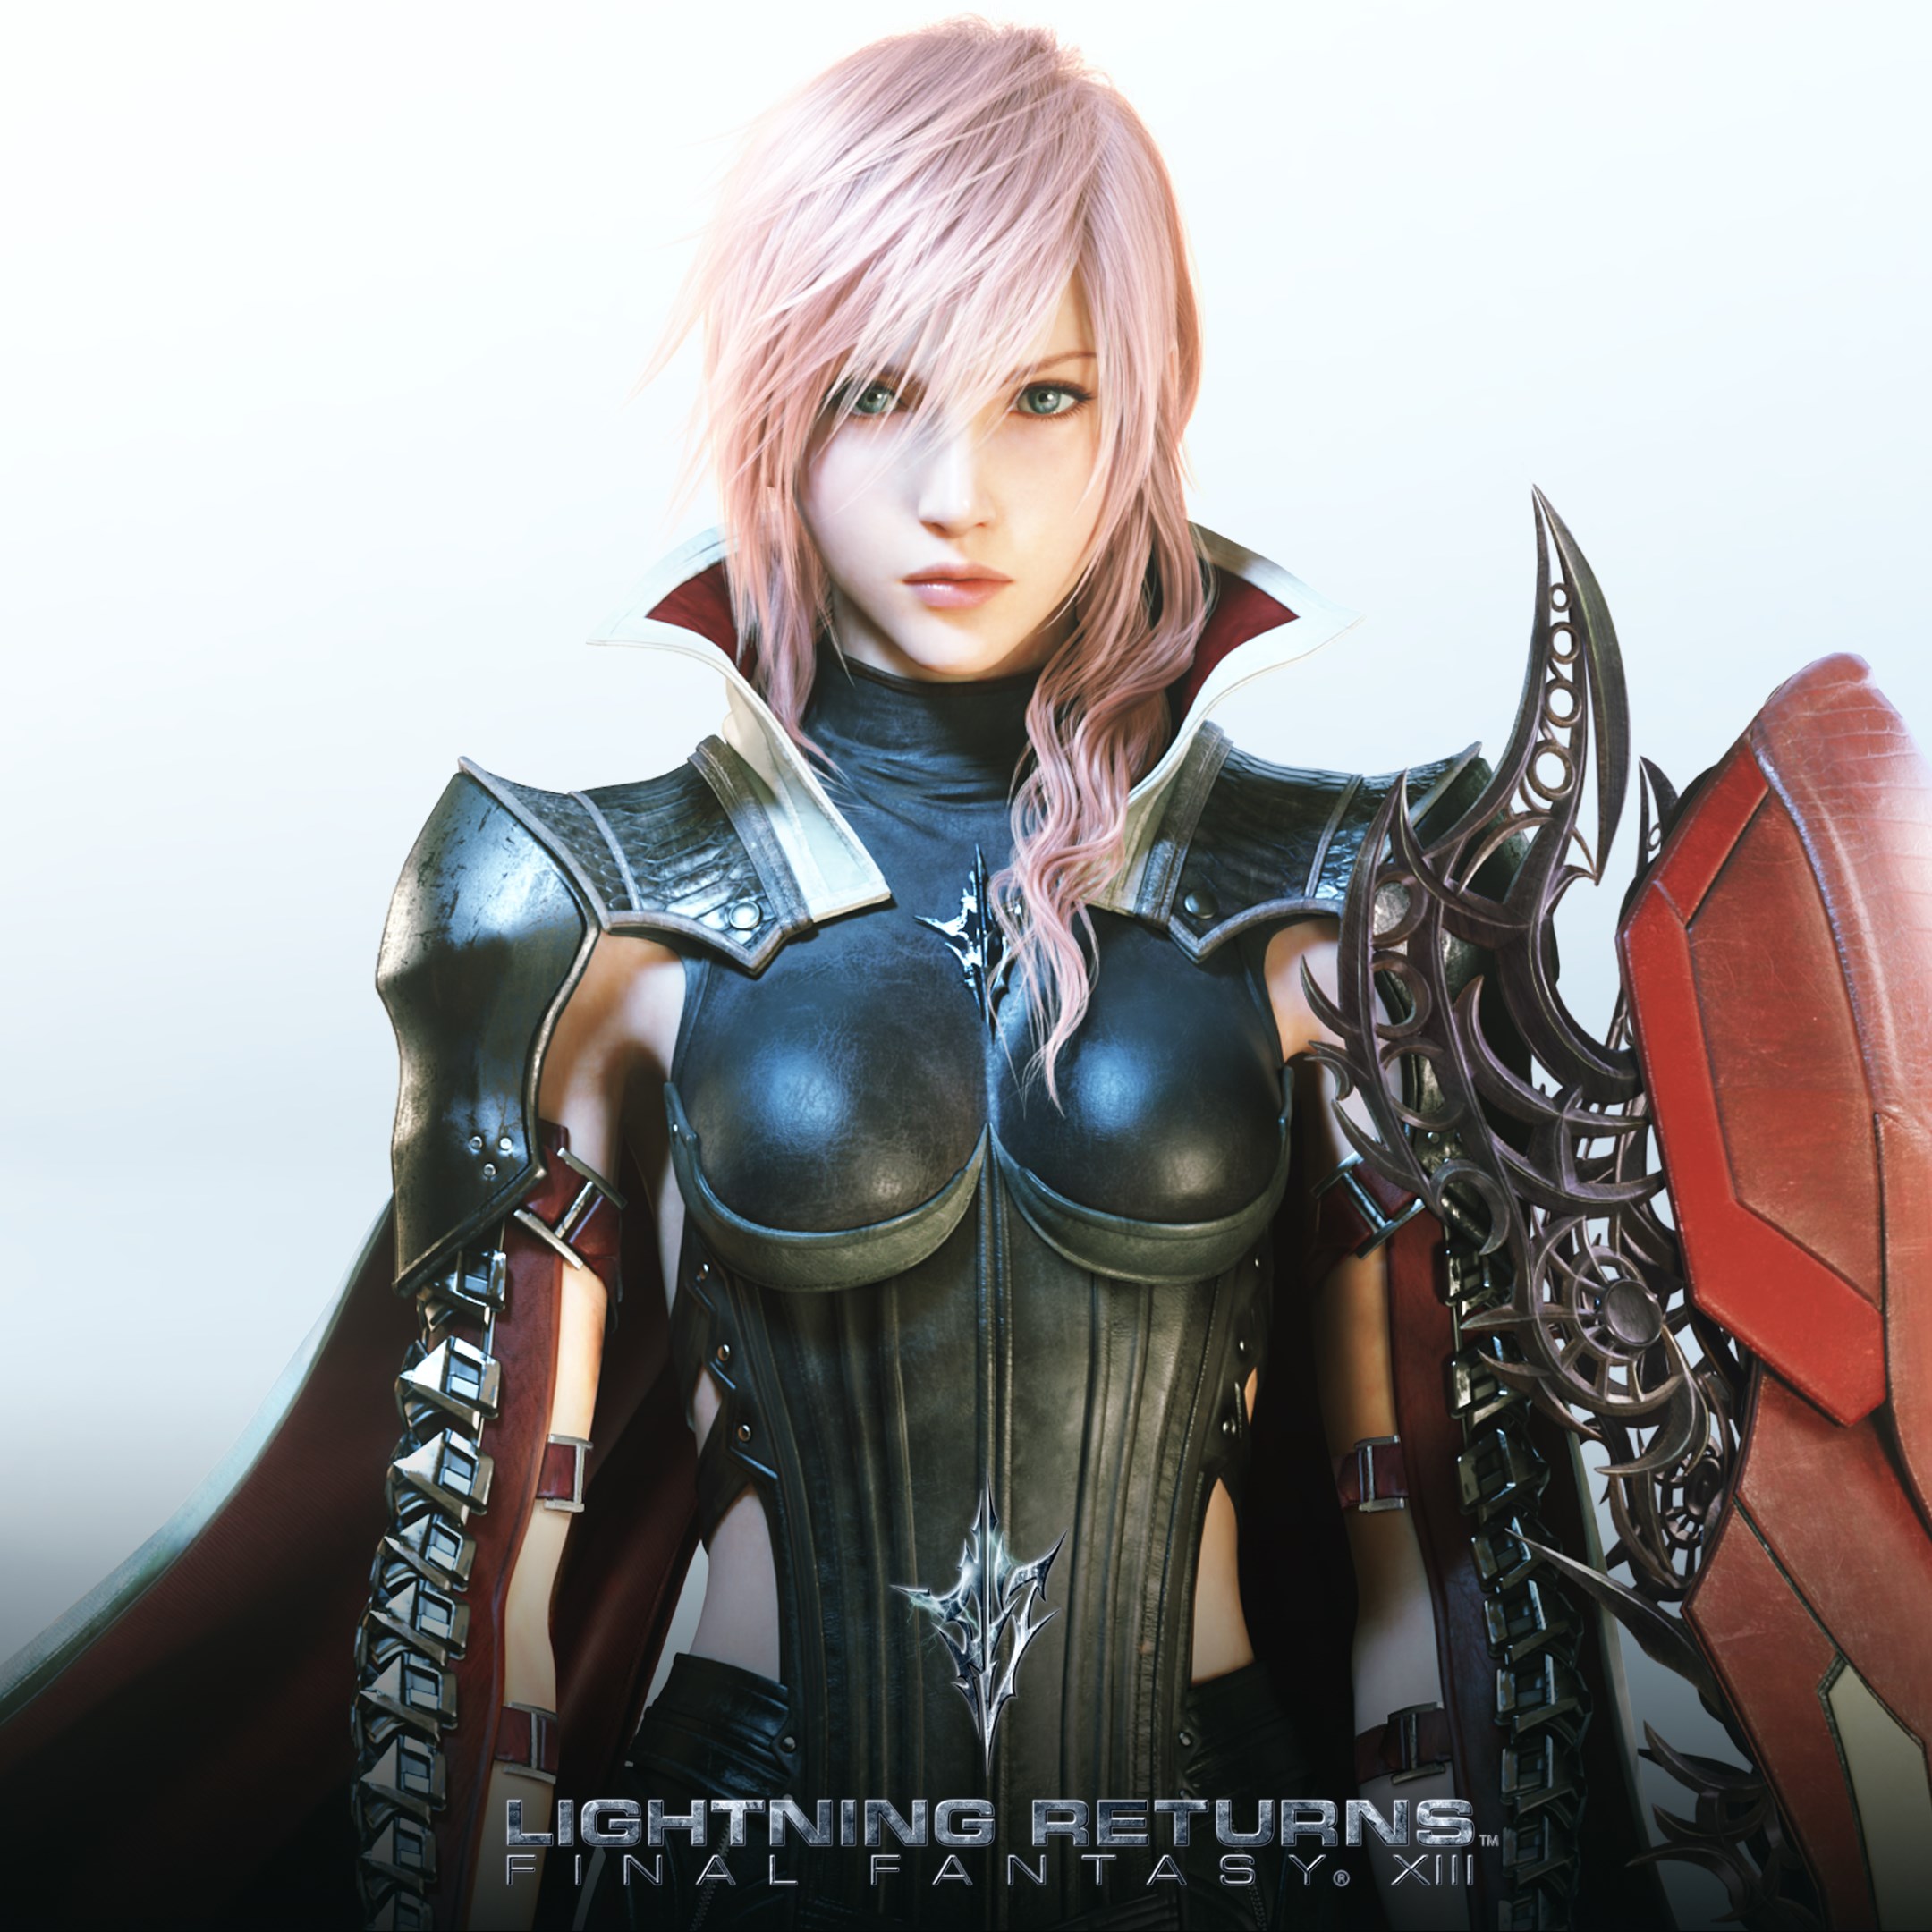 LIGHTNING RETURNS: FINAL FANTASY XIII technical specifications for laptop